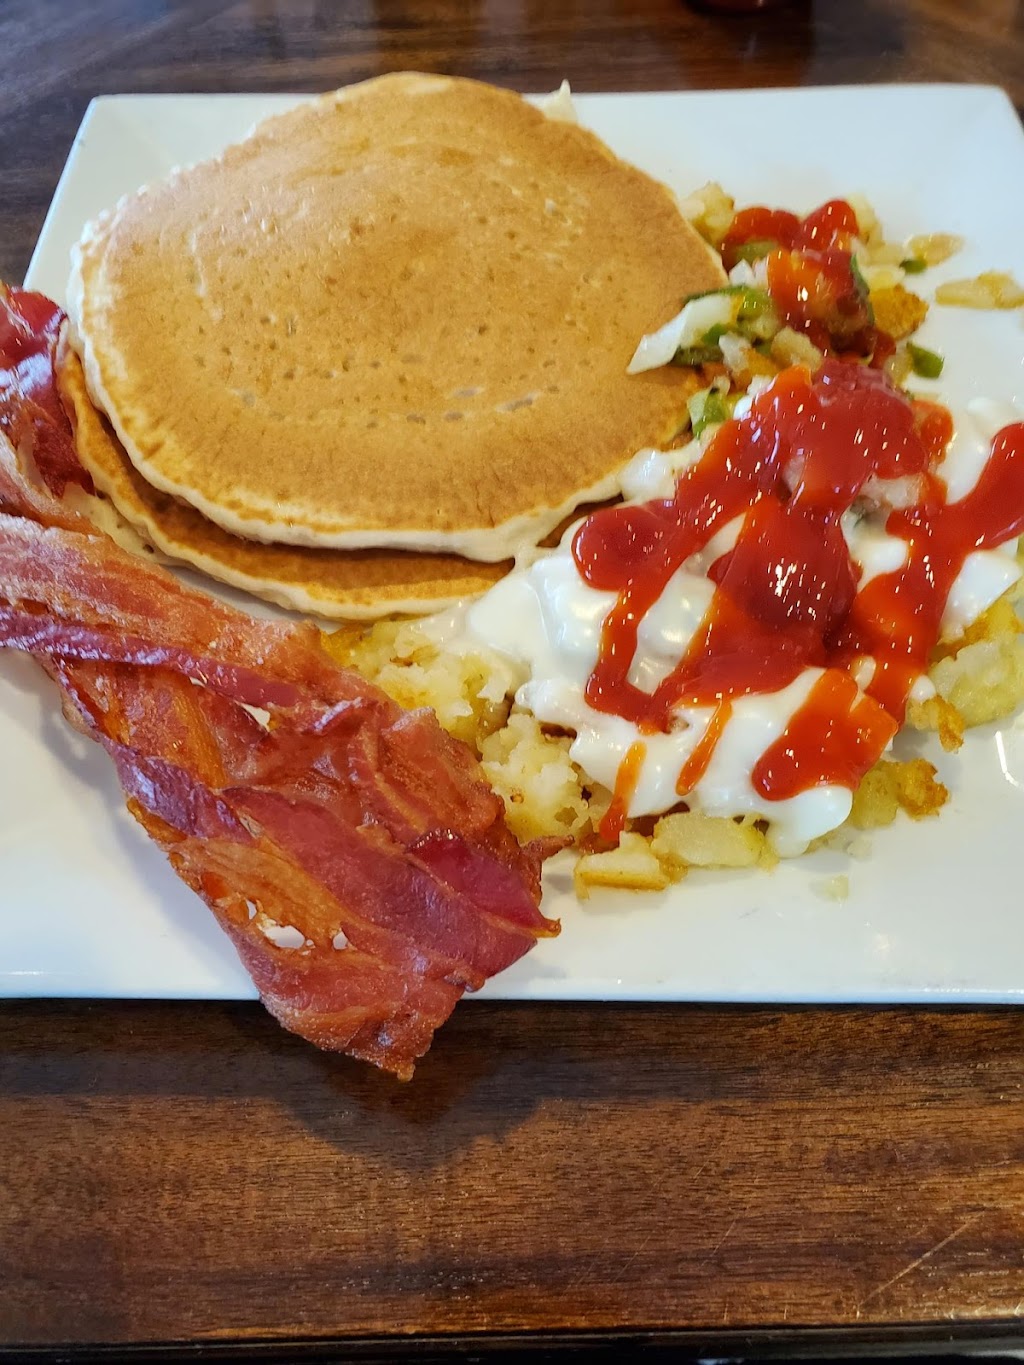 Upland Diner | 1000 Upland Ave, Chester, PA 19013 | Phone: (610) 872-6545